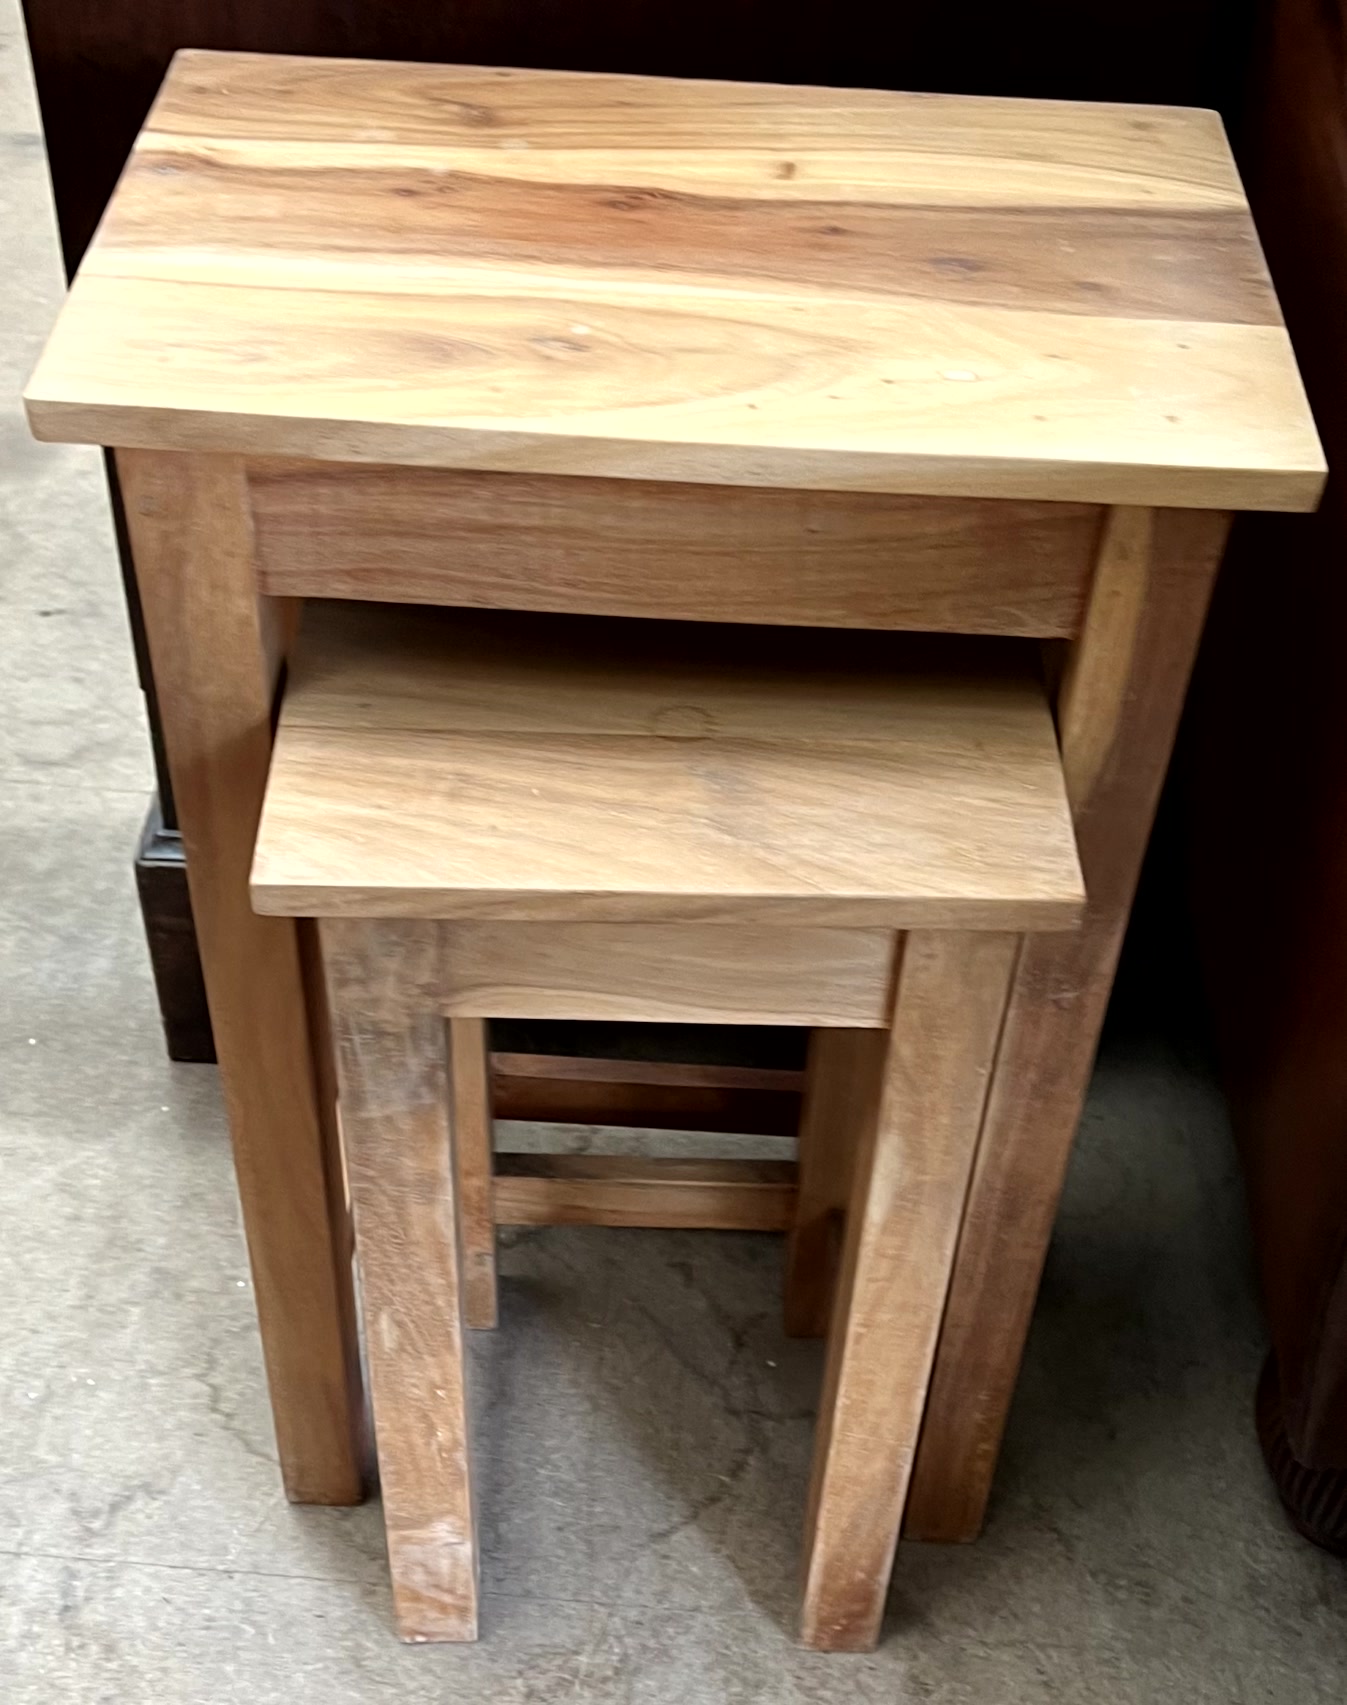 A nest of two modern tables